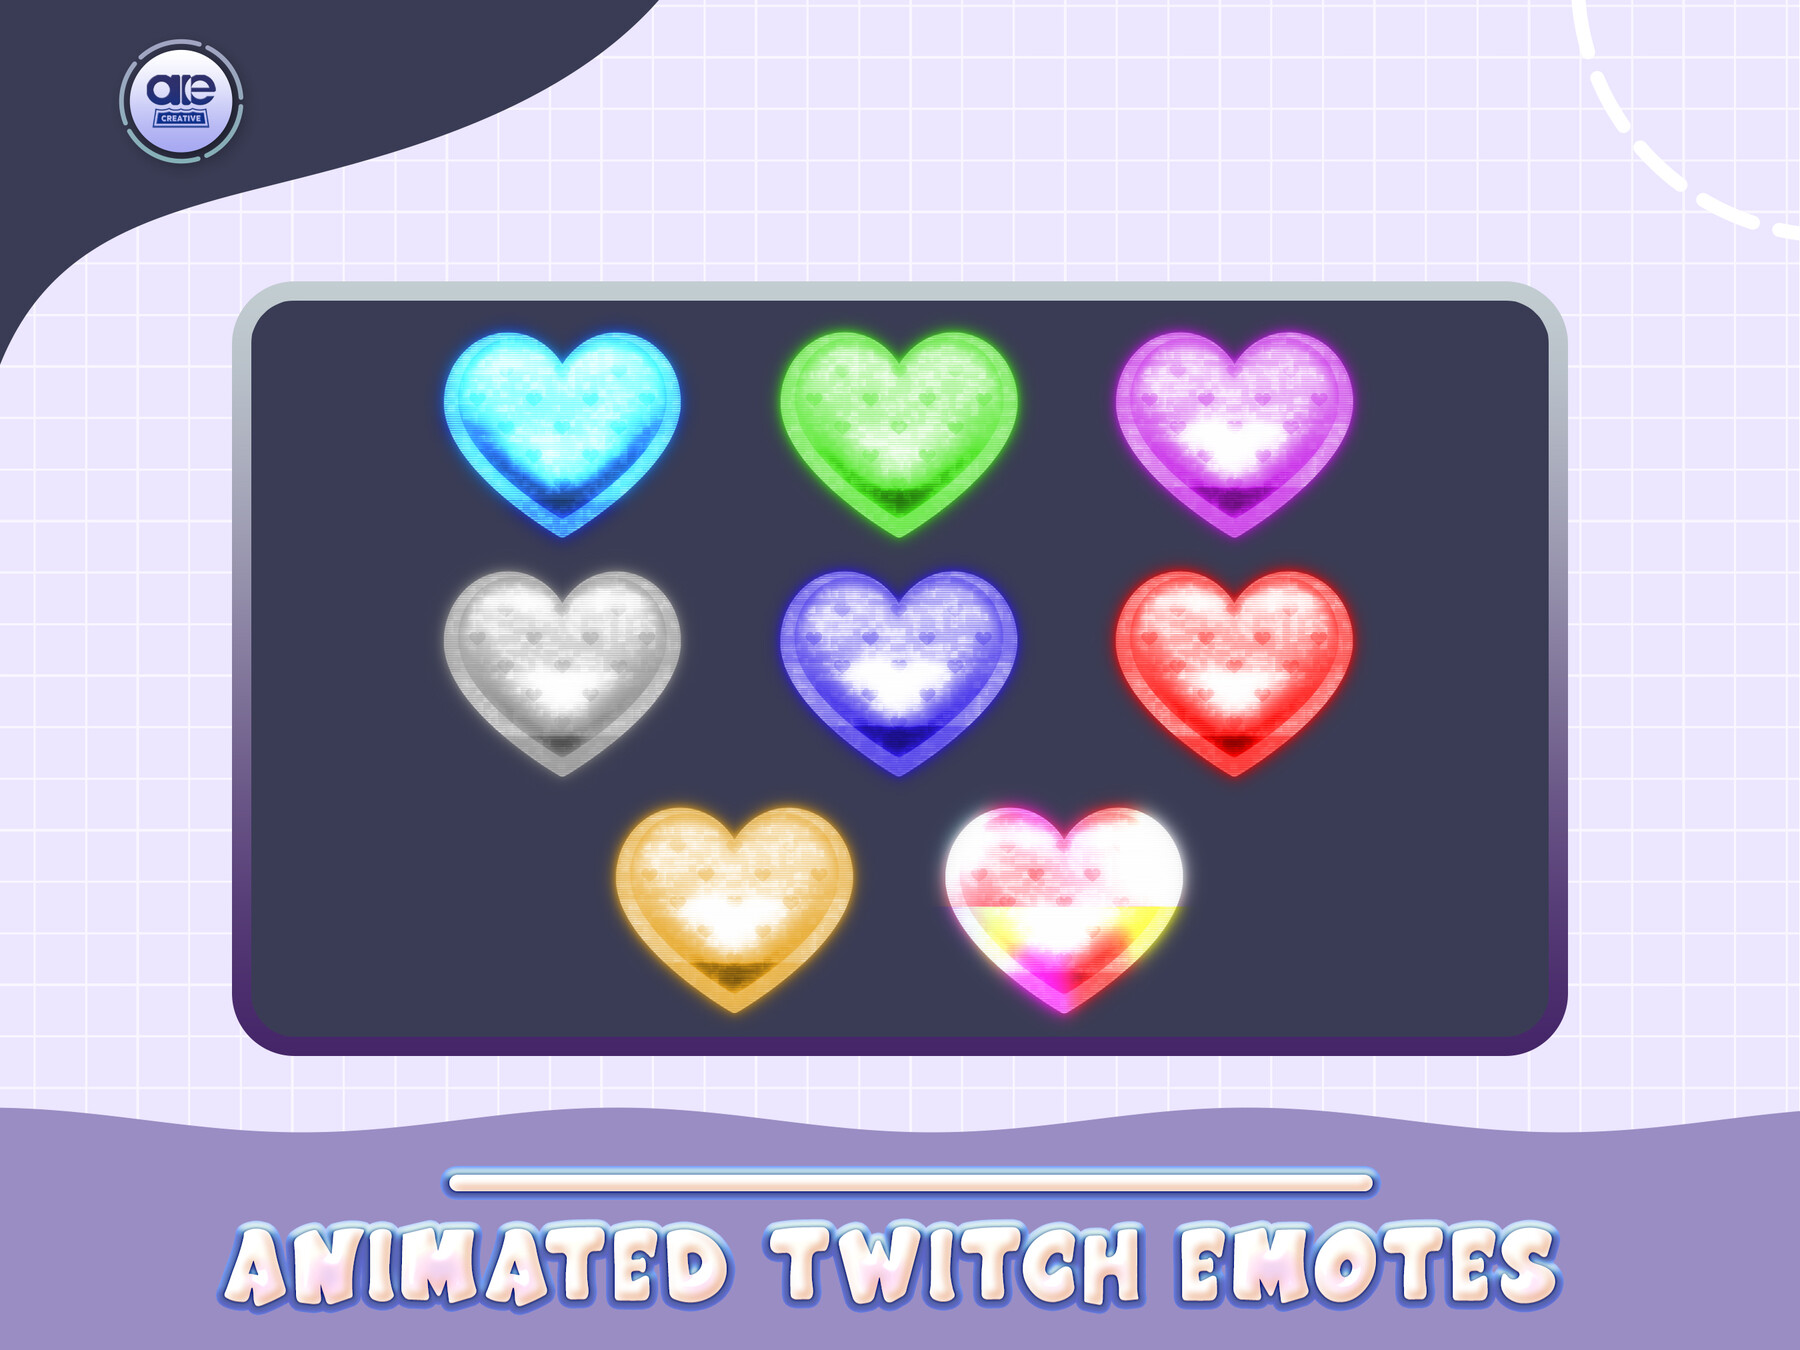 ArtStation - Animated Twitch Emotes Hearts, Valentine's Emote, Animated  hearts Emotes, Heart Emote, Emoji for Twitch and Discord, Animated Gif  Emotes | Artworks